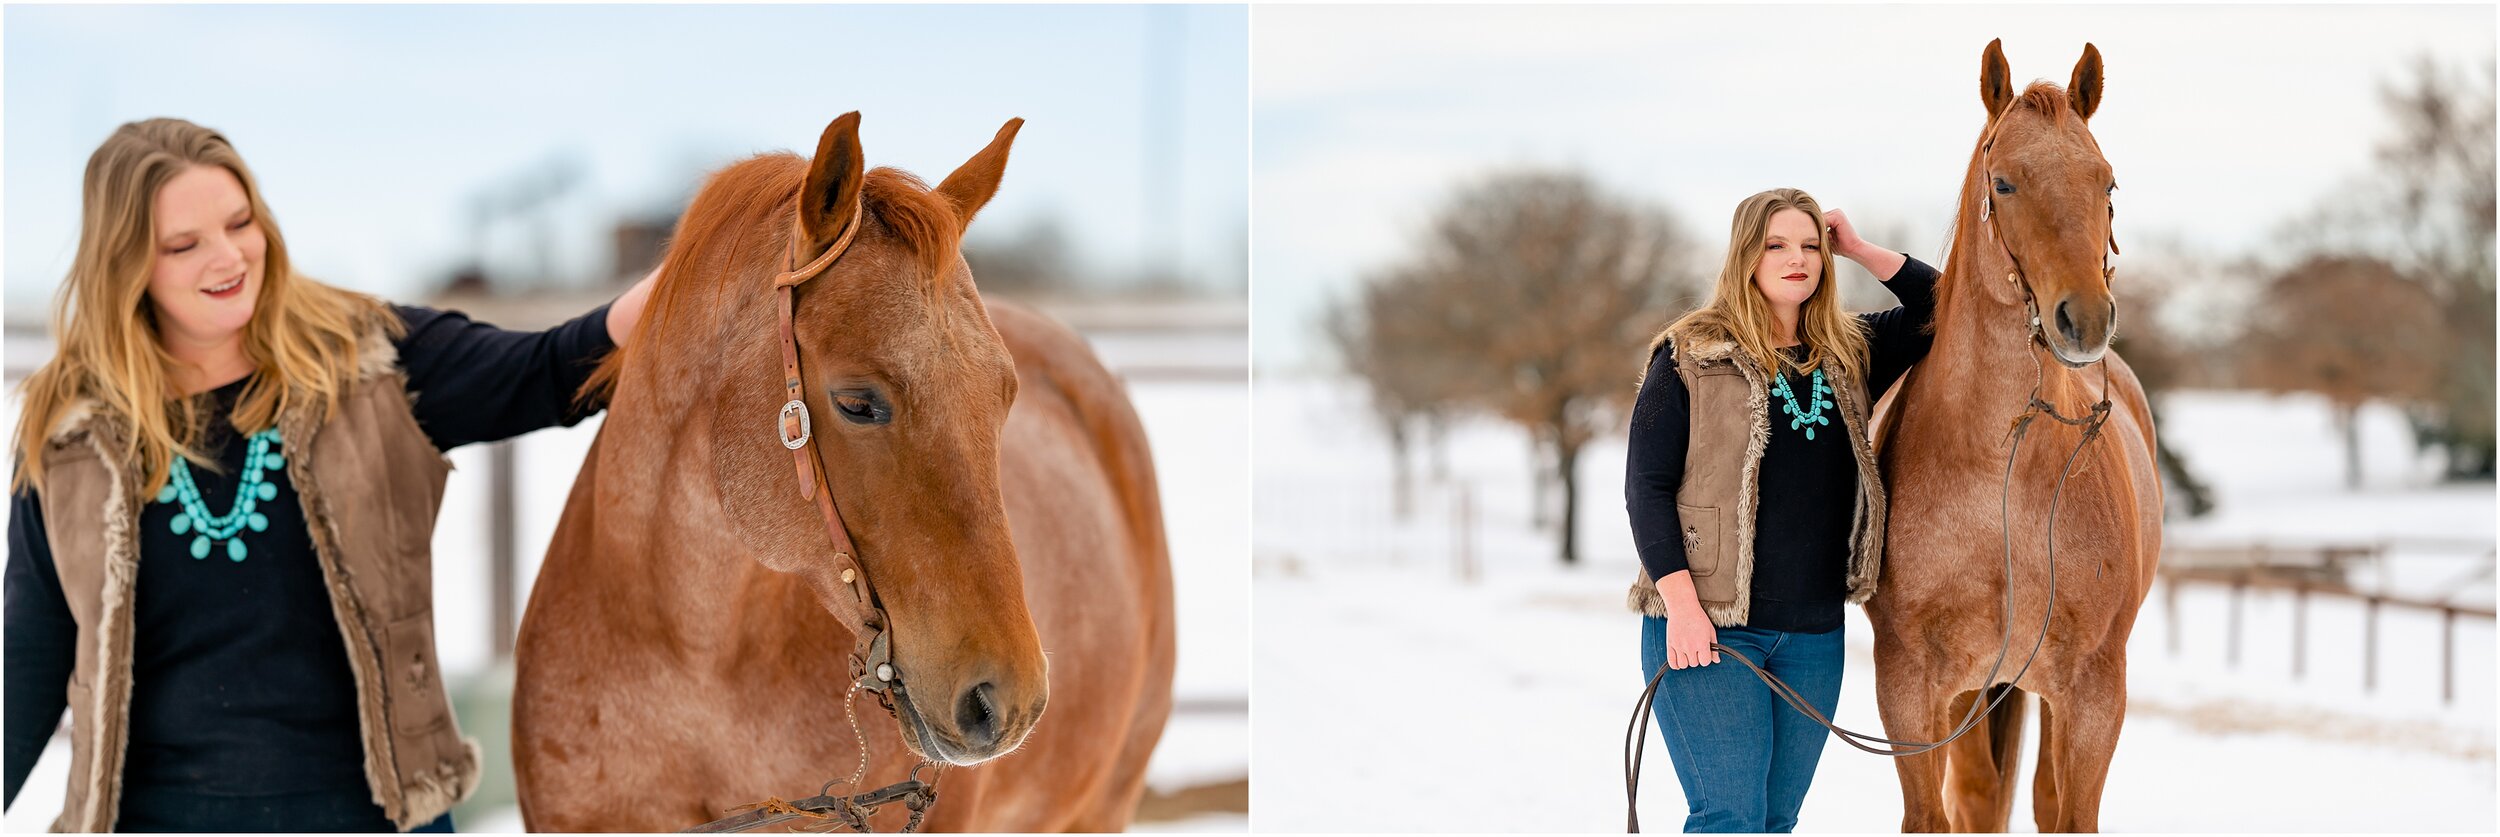 Oklahoma horse photographer winter styled shoot with quarter horses and wesh pony stallion at Johnson Performance Horses by Rachel Griffin Photography_20.jpg